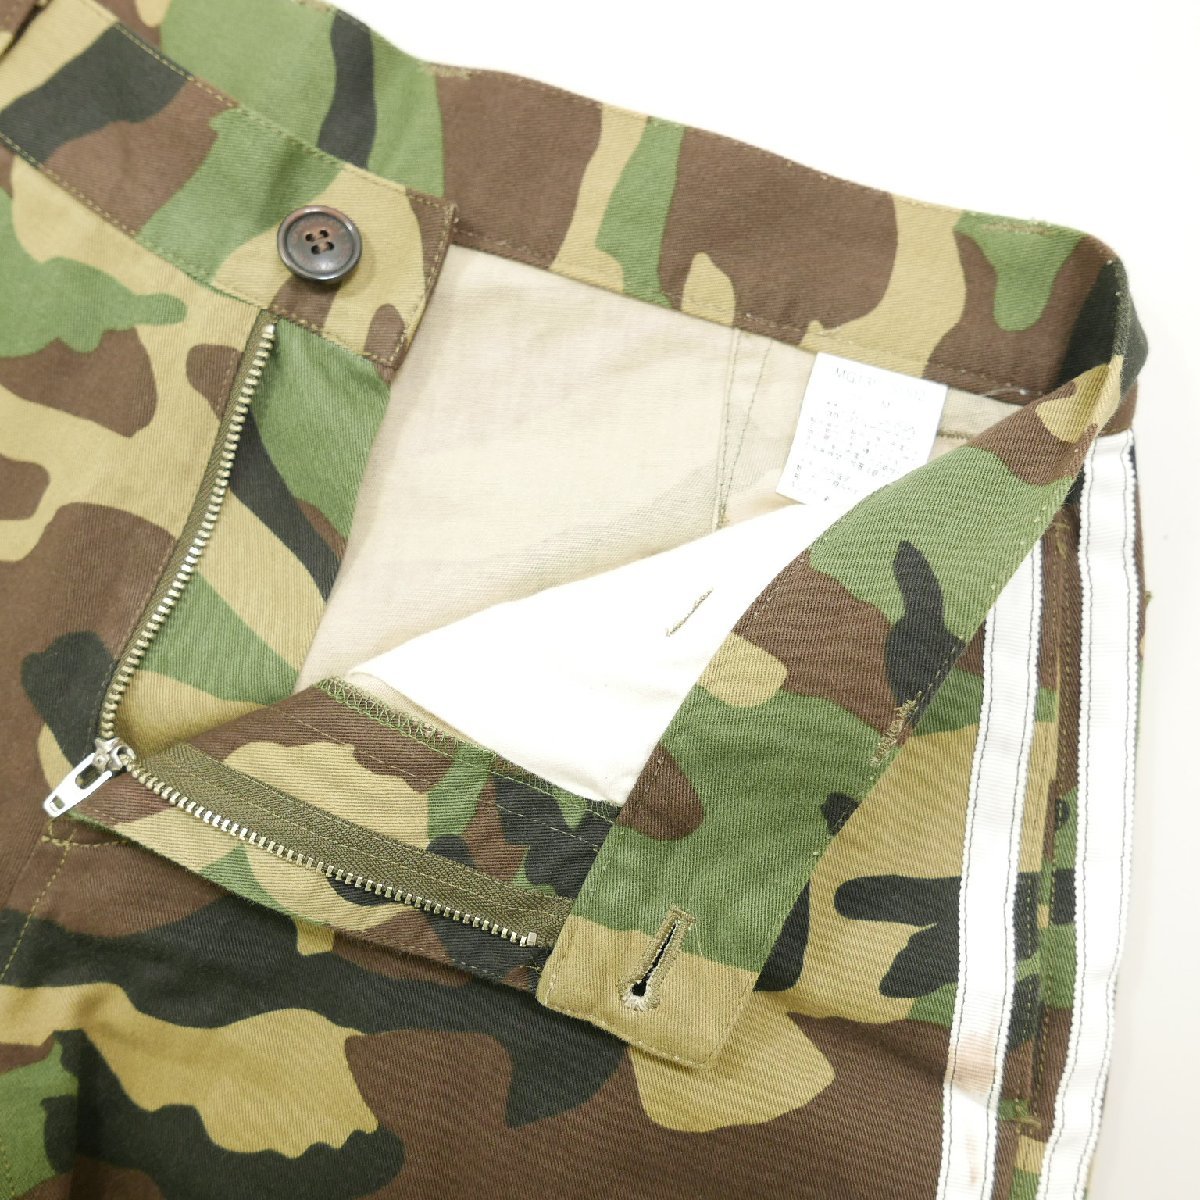 MR.GENTLEMAN Mr. jento Le Mans side line camouflage shorts short bread short pants camouflage CAMOUFLAGE M MG13S-SO02